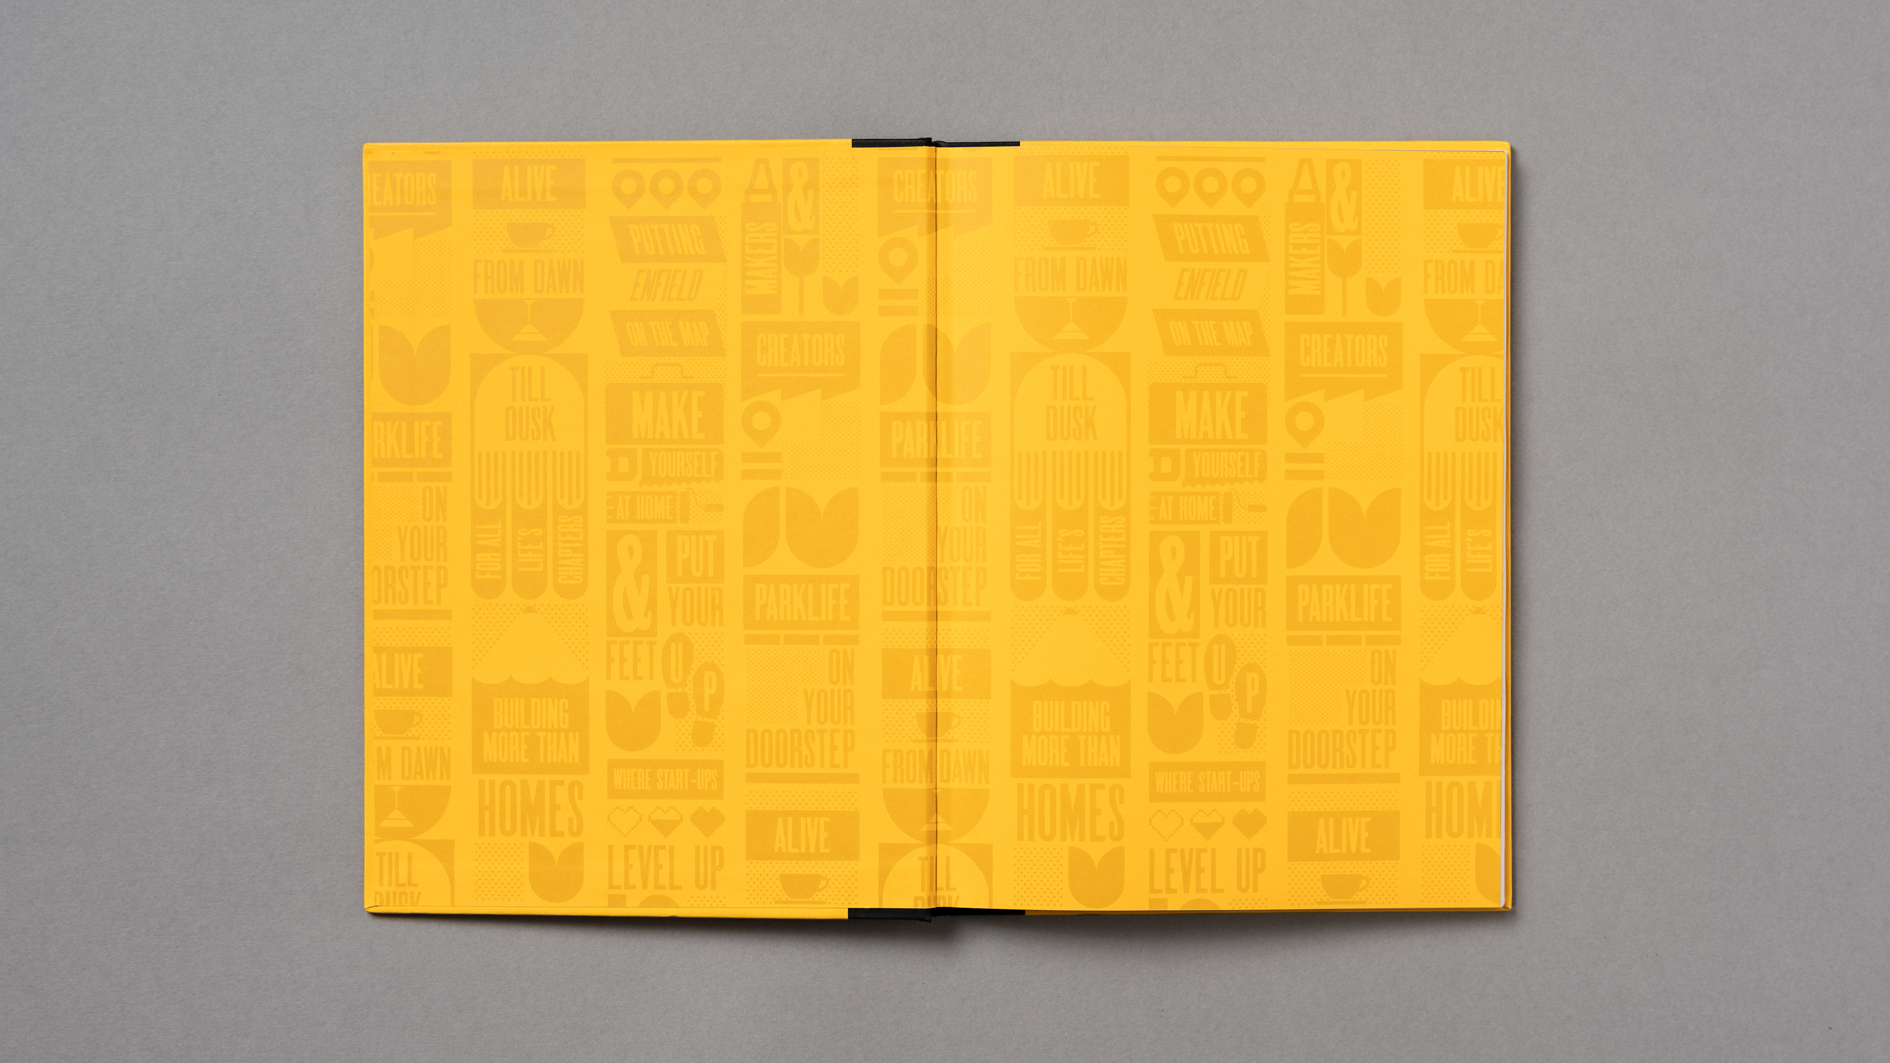 OneBigCompany-Endpapers-Vistry-MeridianOne